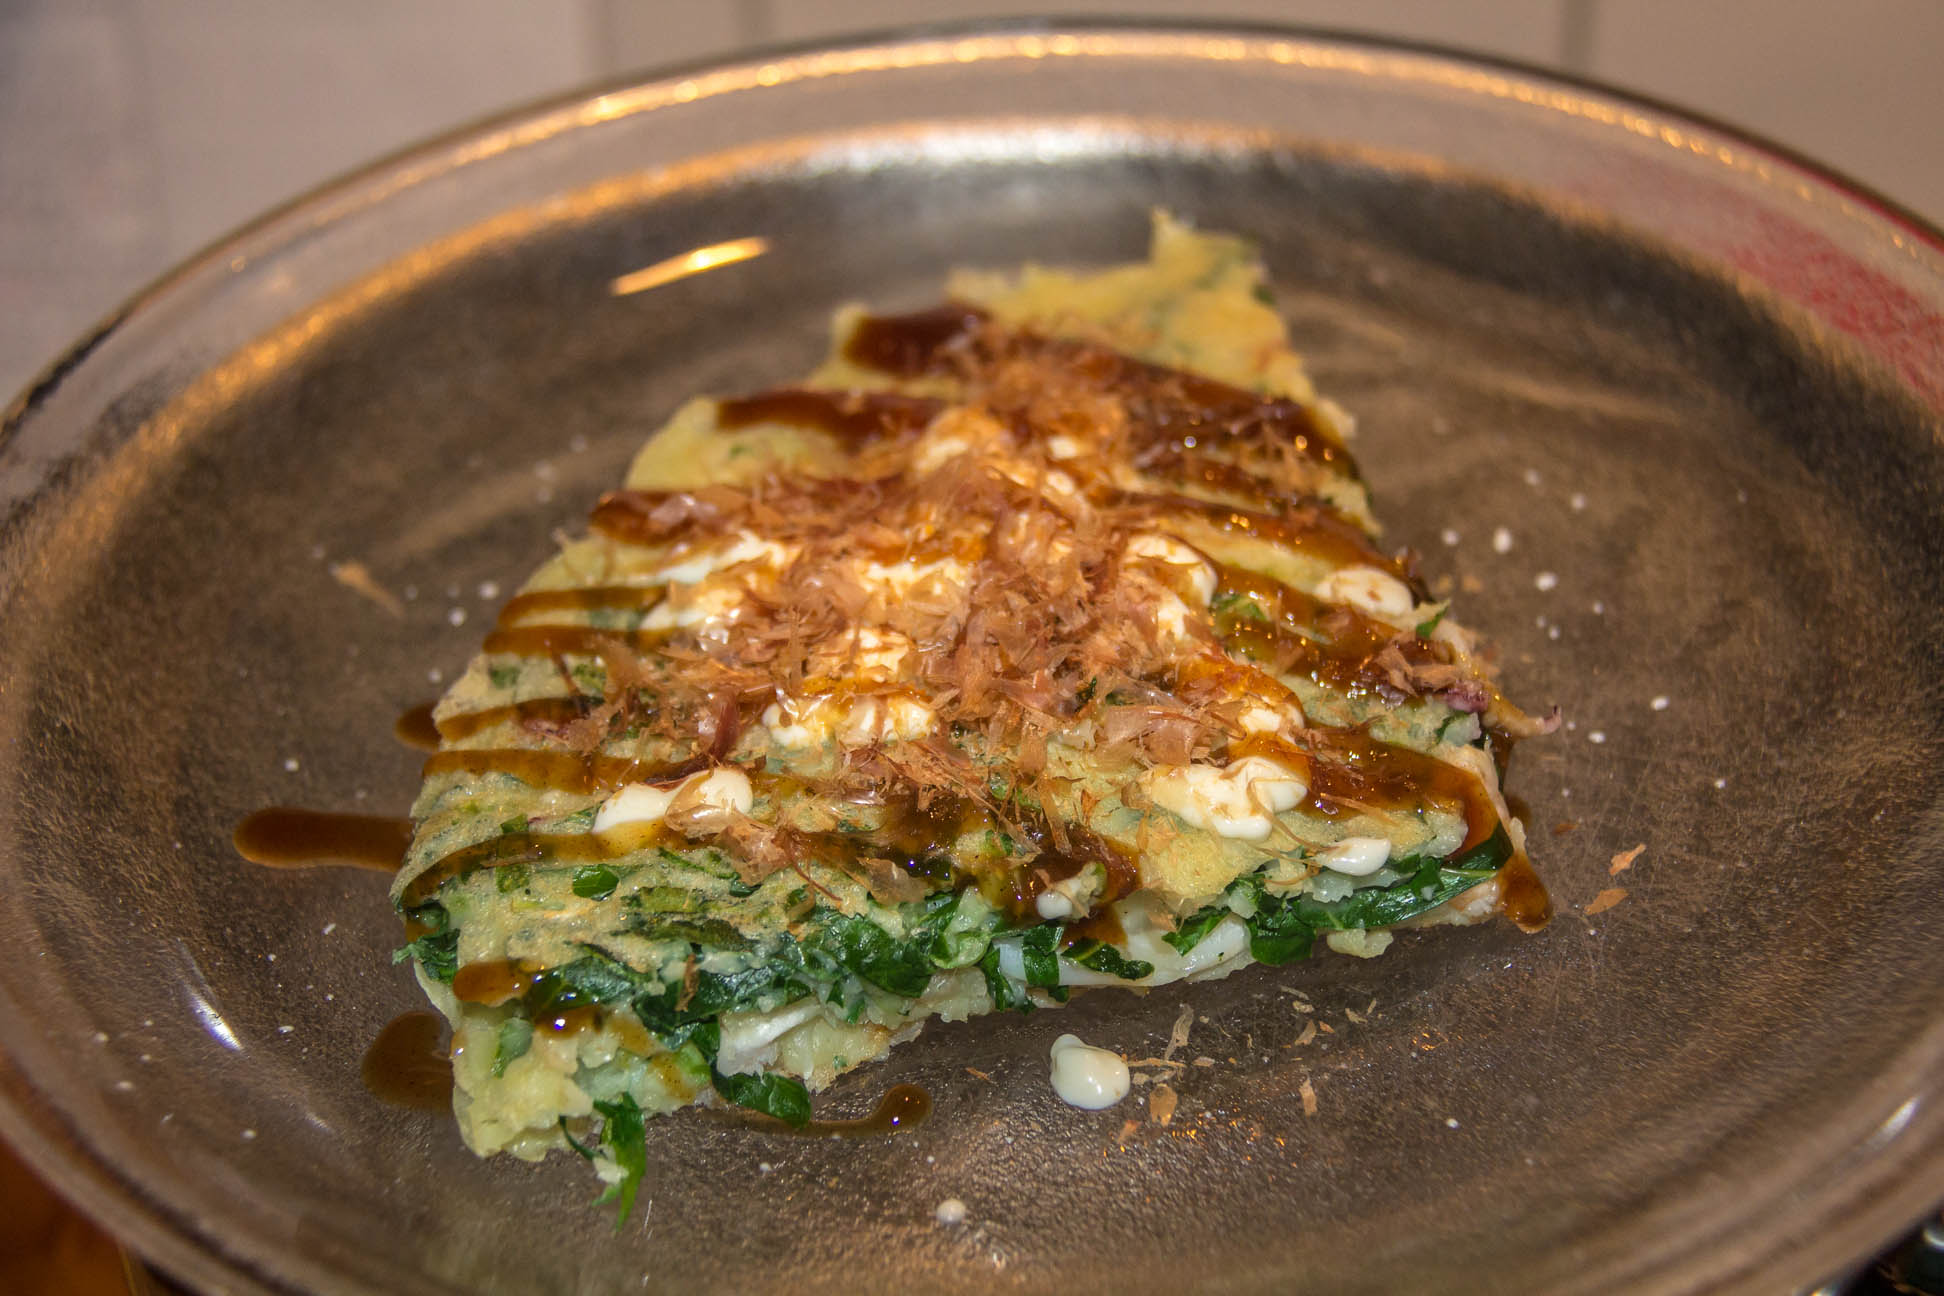 05/07/15 A slice of the finished dish with Japanese mayo and Okonomiyaki sauce and fish flakes 